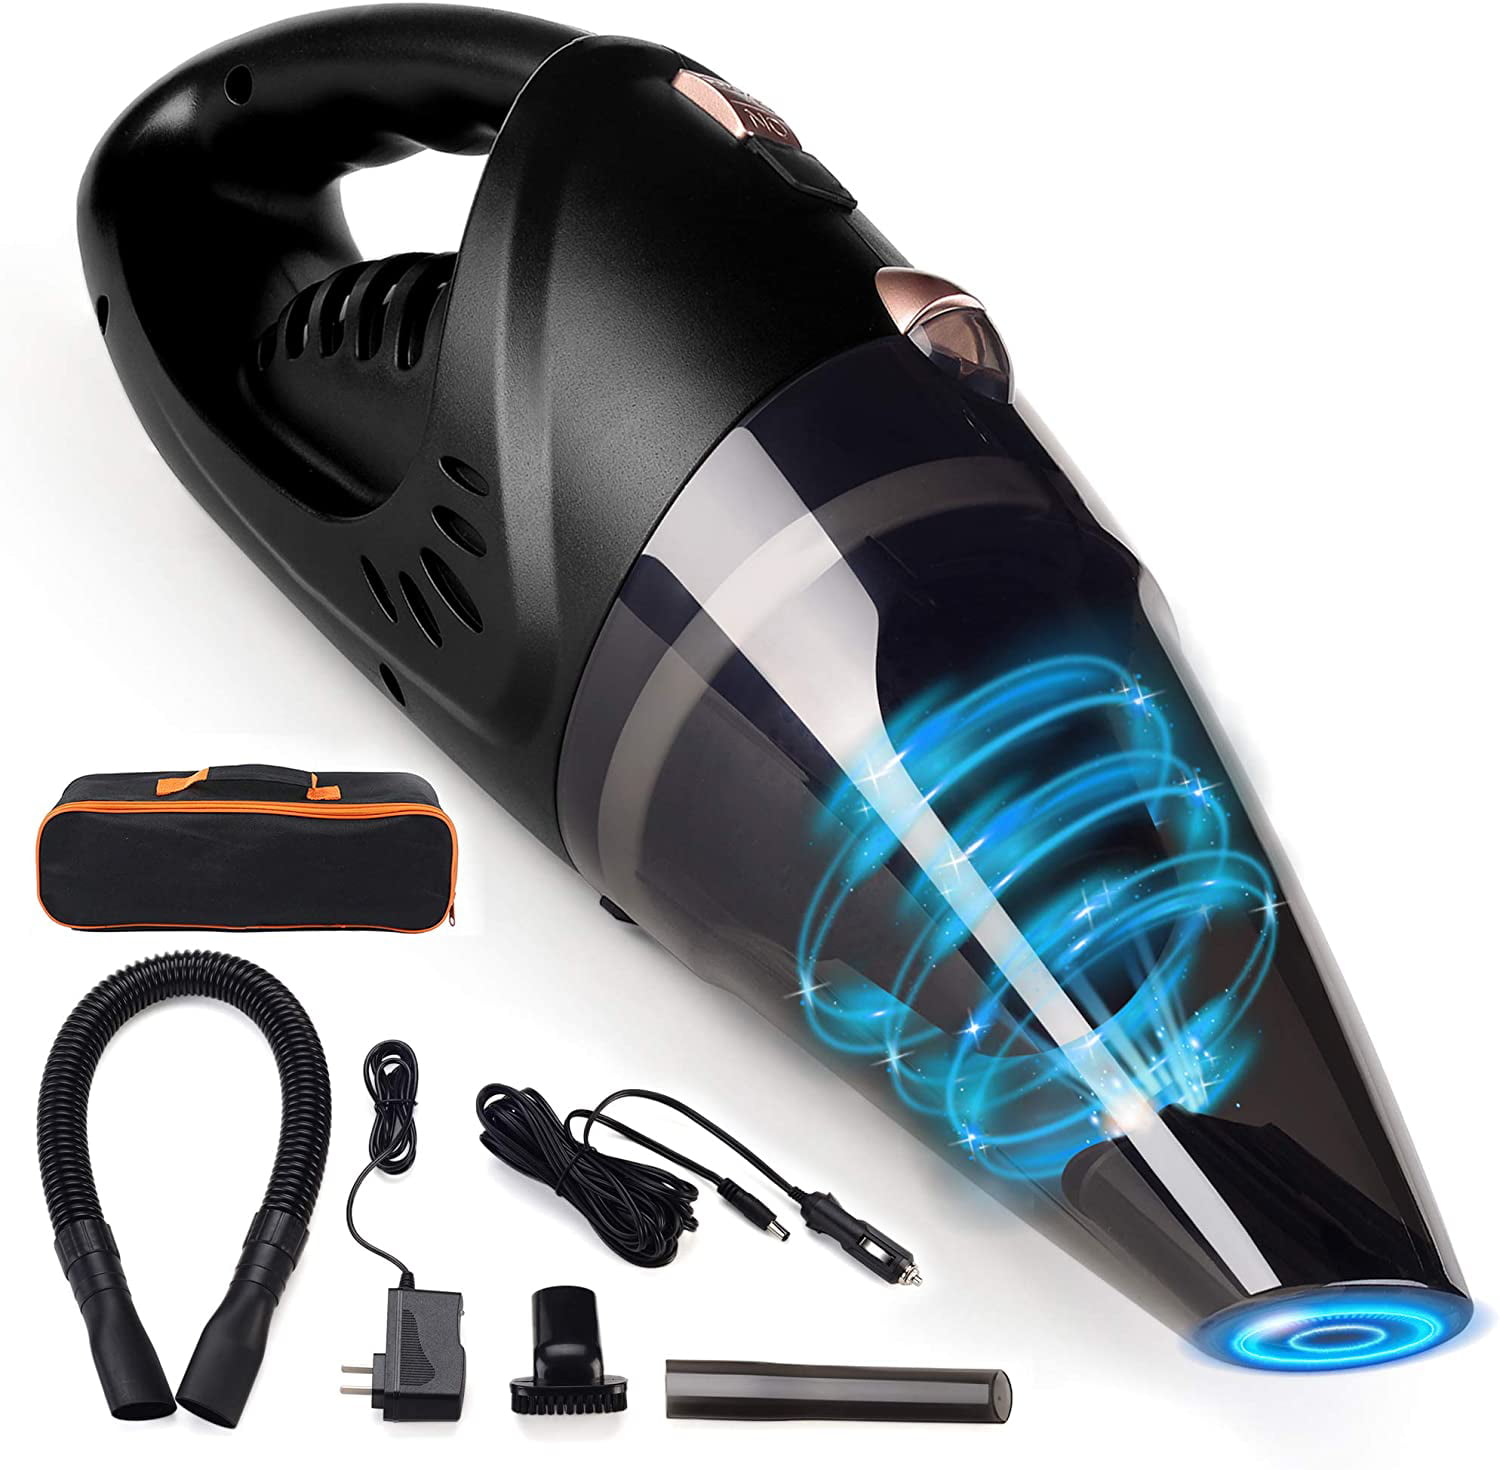 GAKIN 1 Pc Car Handheld Vacuum Cleaner Portable 120W Super Suction Lightweight for Home Efficient Cleaning